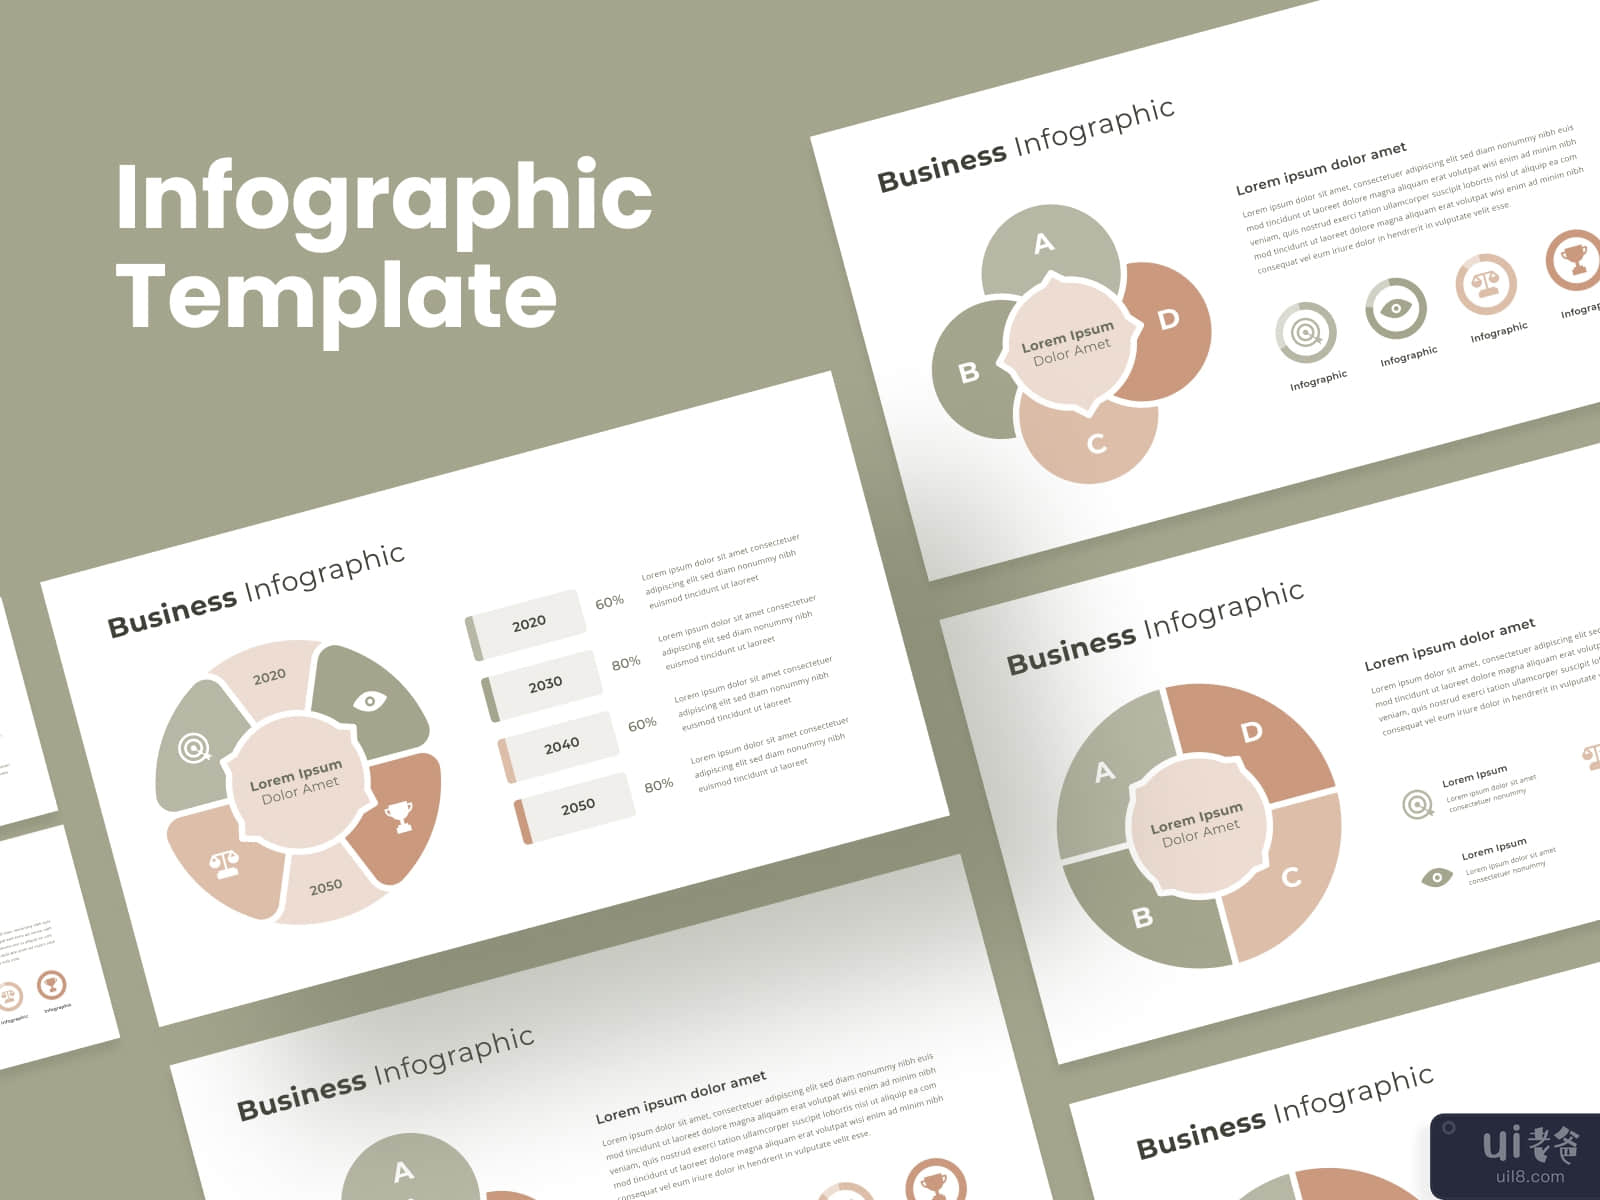 Infographic template